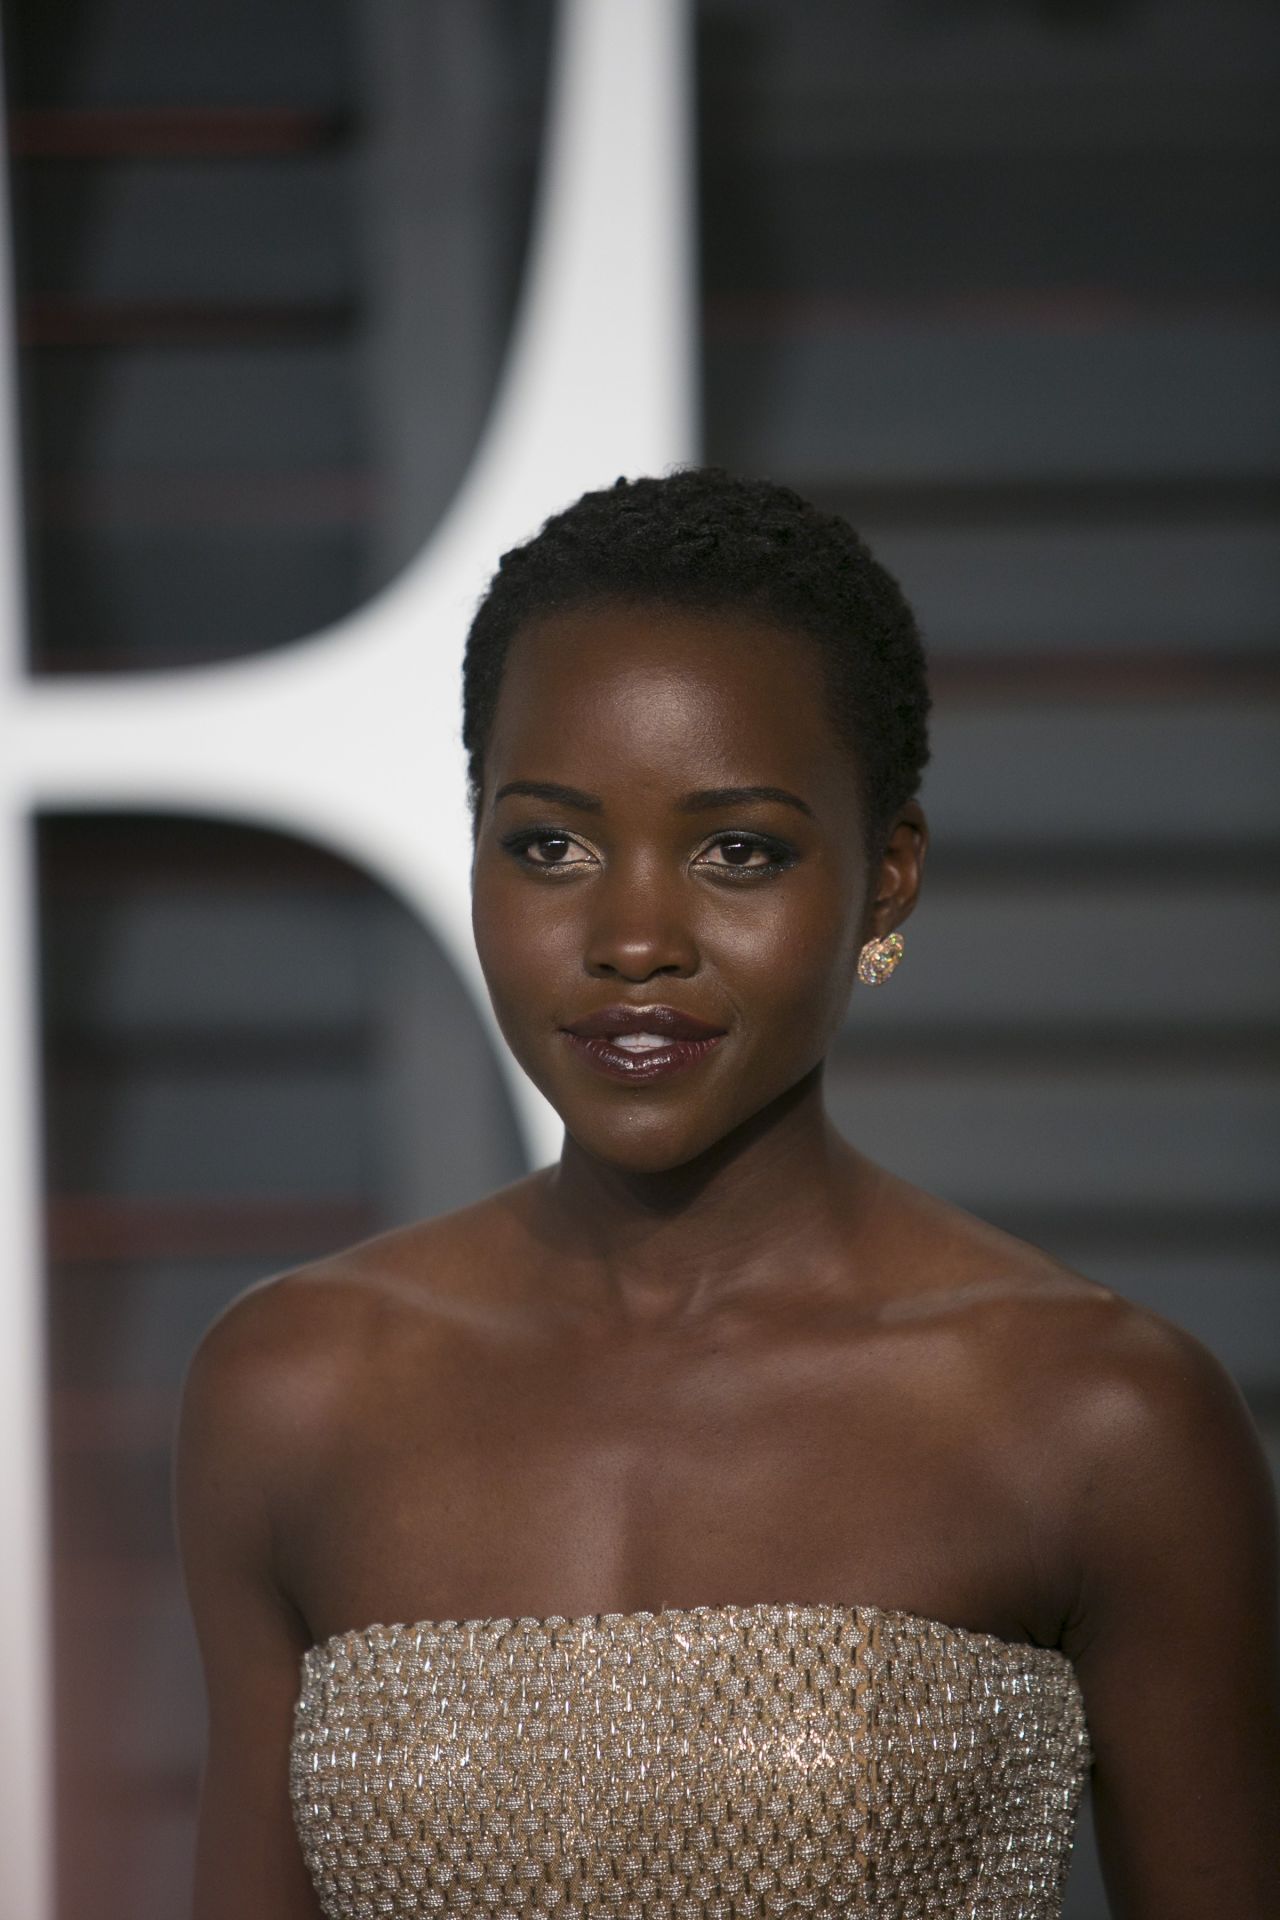 Oscar winner Lupita Nyong'o will co-star in the next "Star Wars" movie, "Episode VII: The Force Awakens," to be directed by J.J. Abrams. It's scheduled to hit theaters in December.